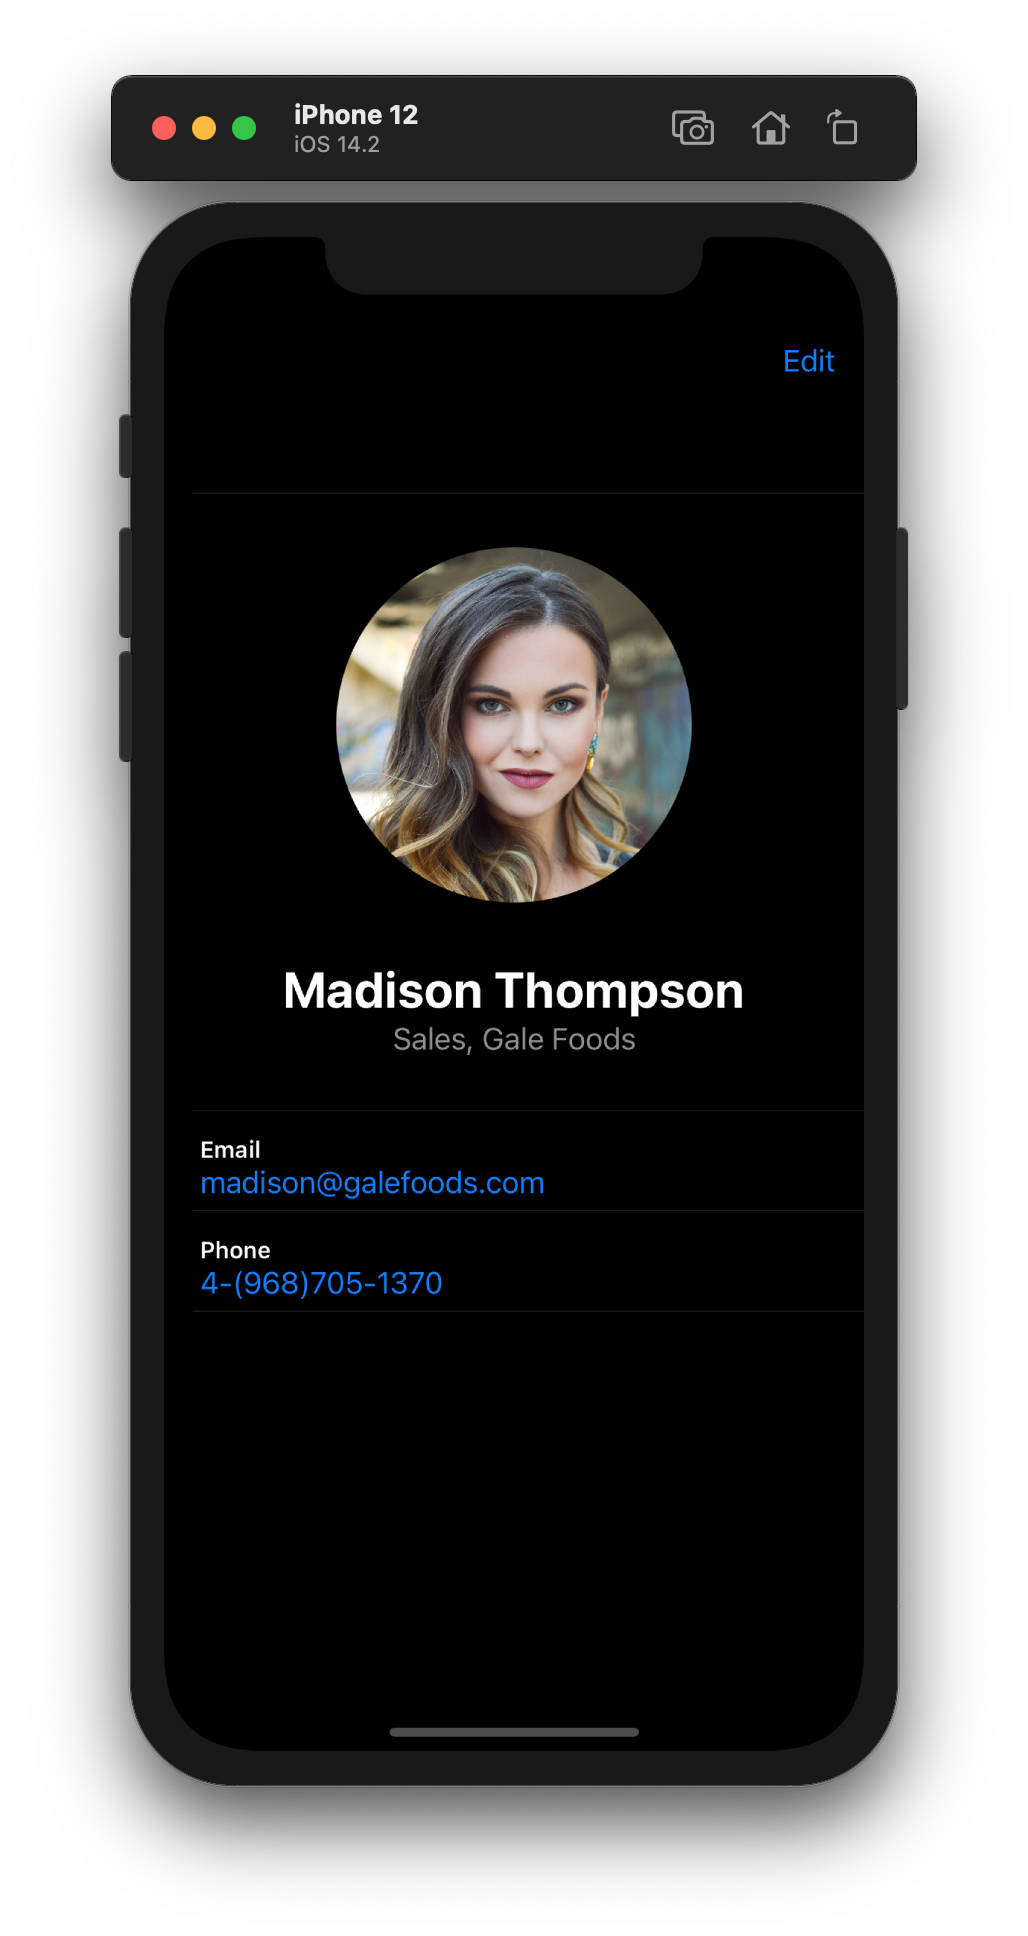 the contact app running on the iOS simulator in Dark Mode